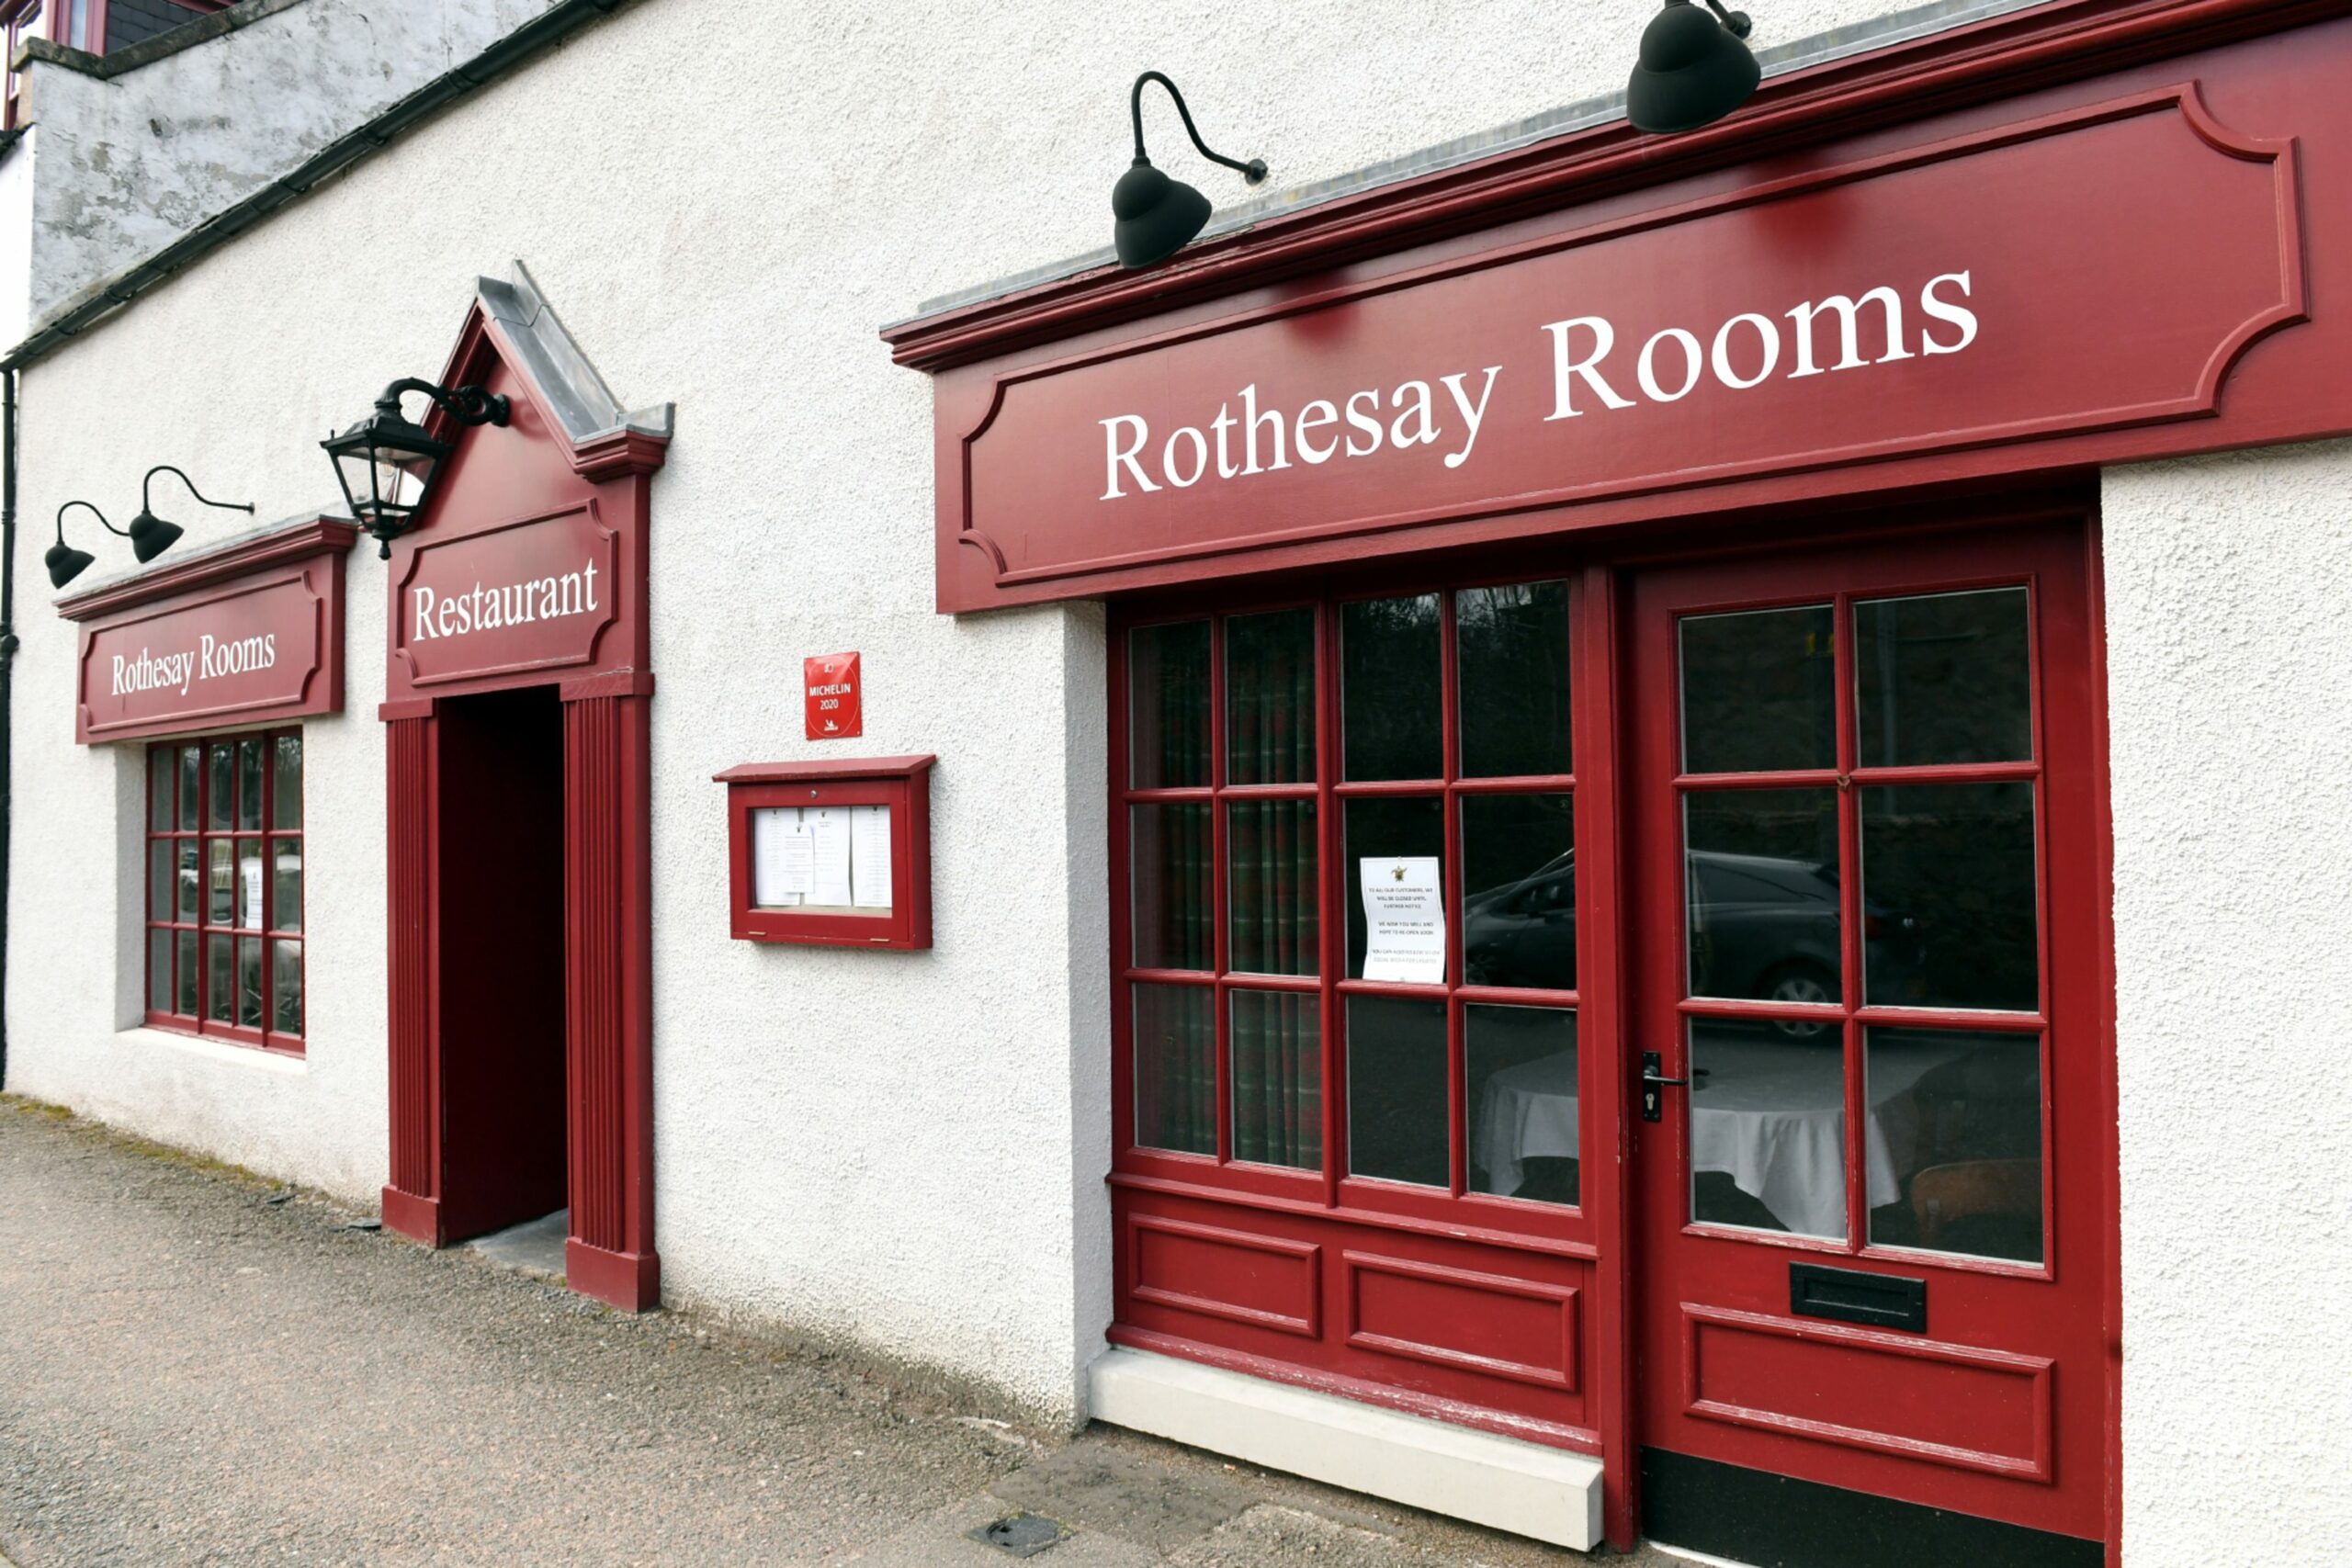 The Rothesay Rooms, Netherley Place, Ballater, Aberdeenshire